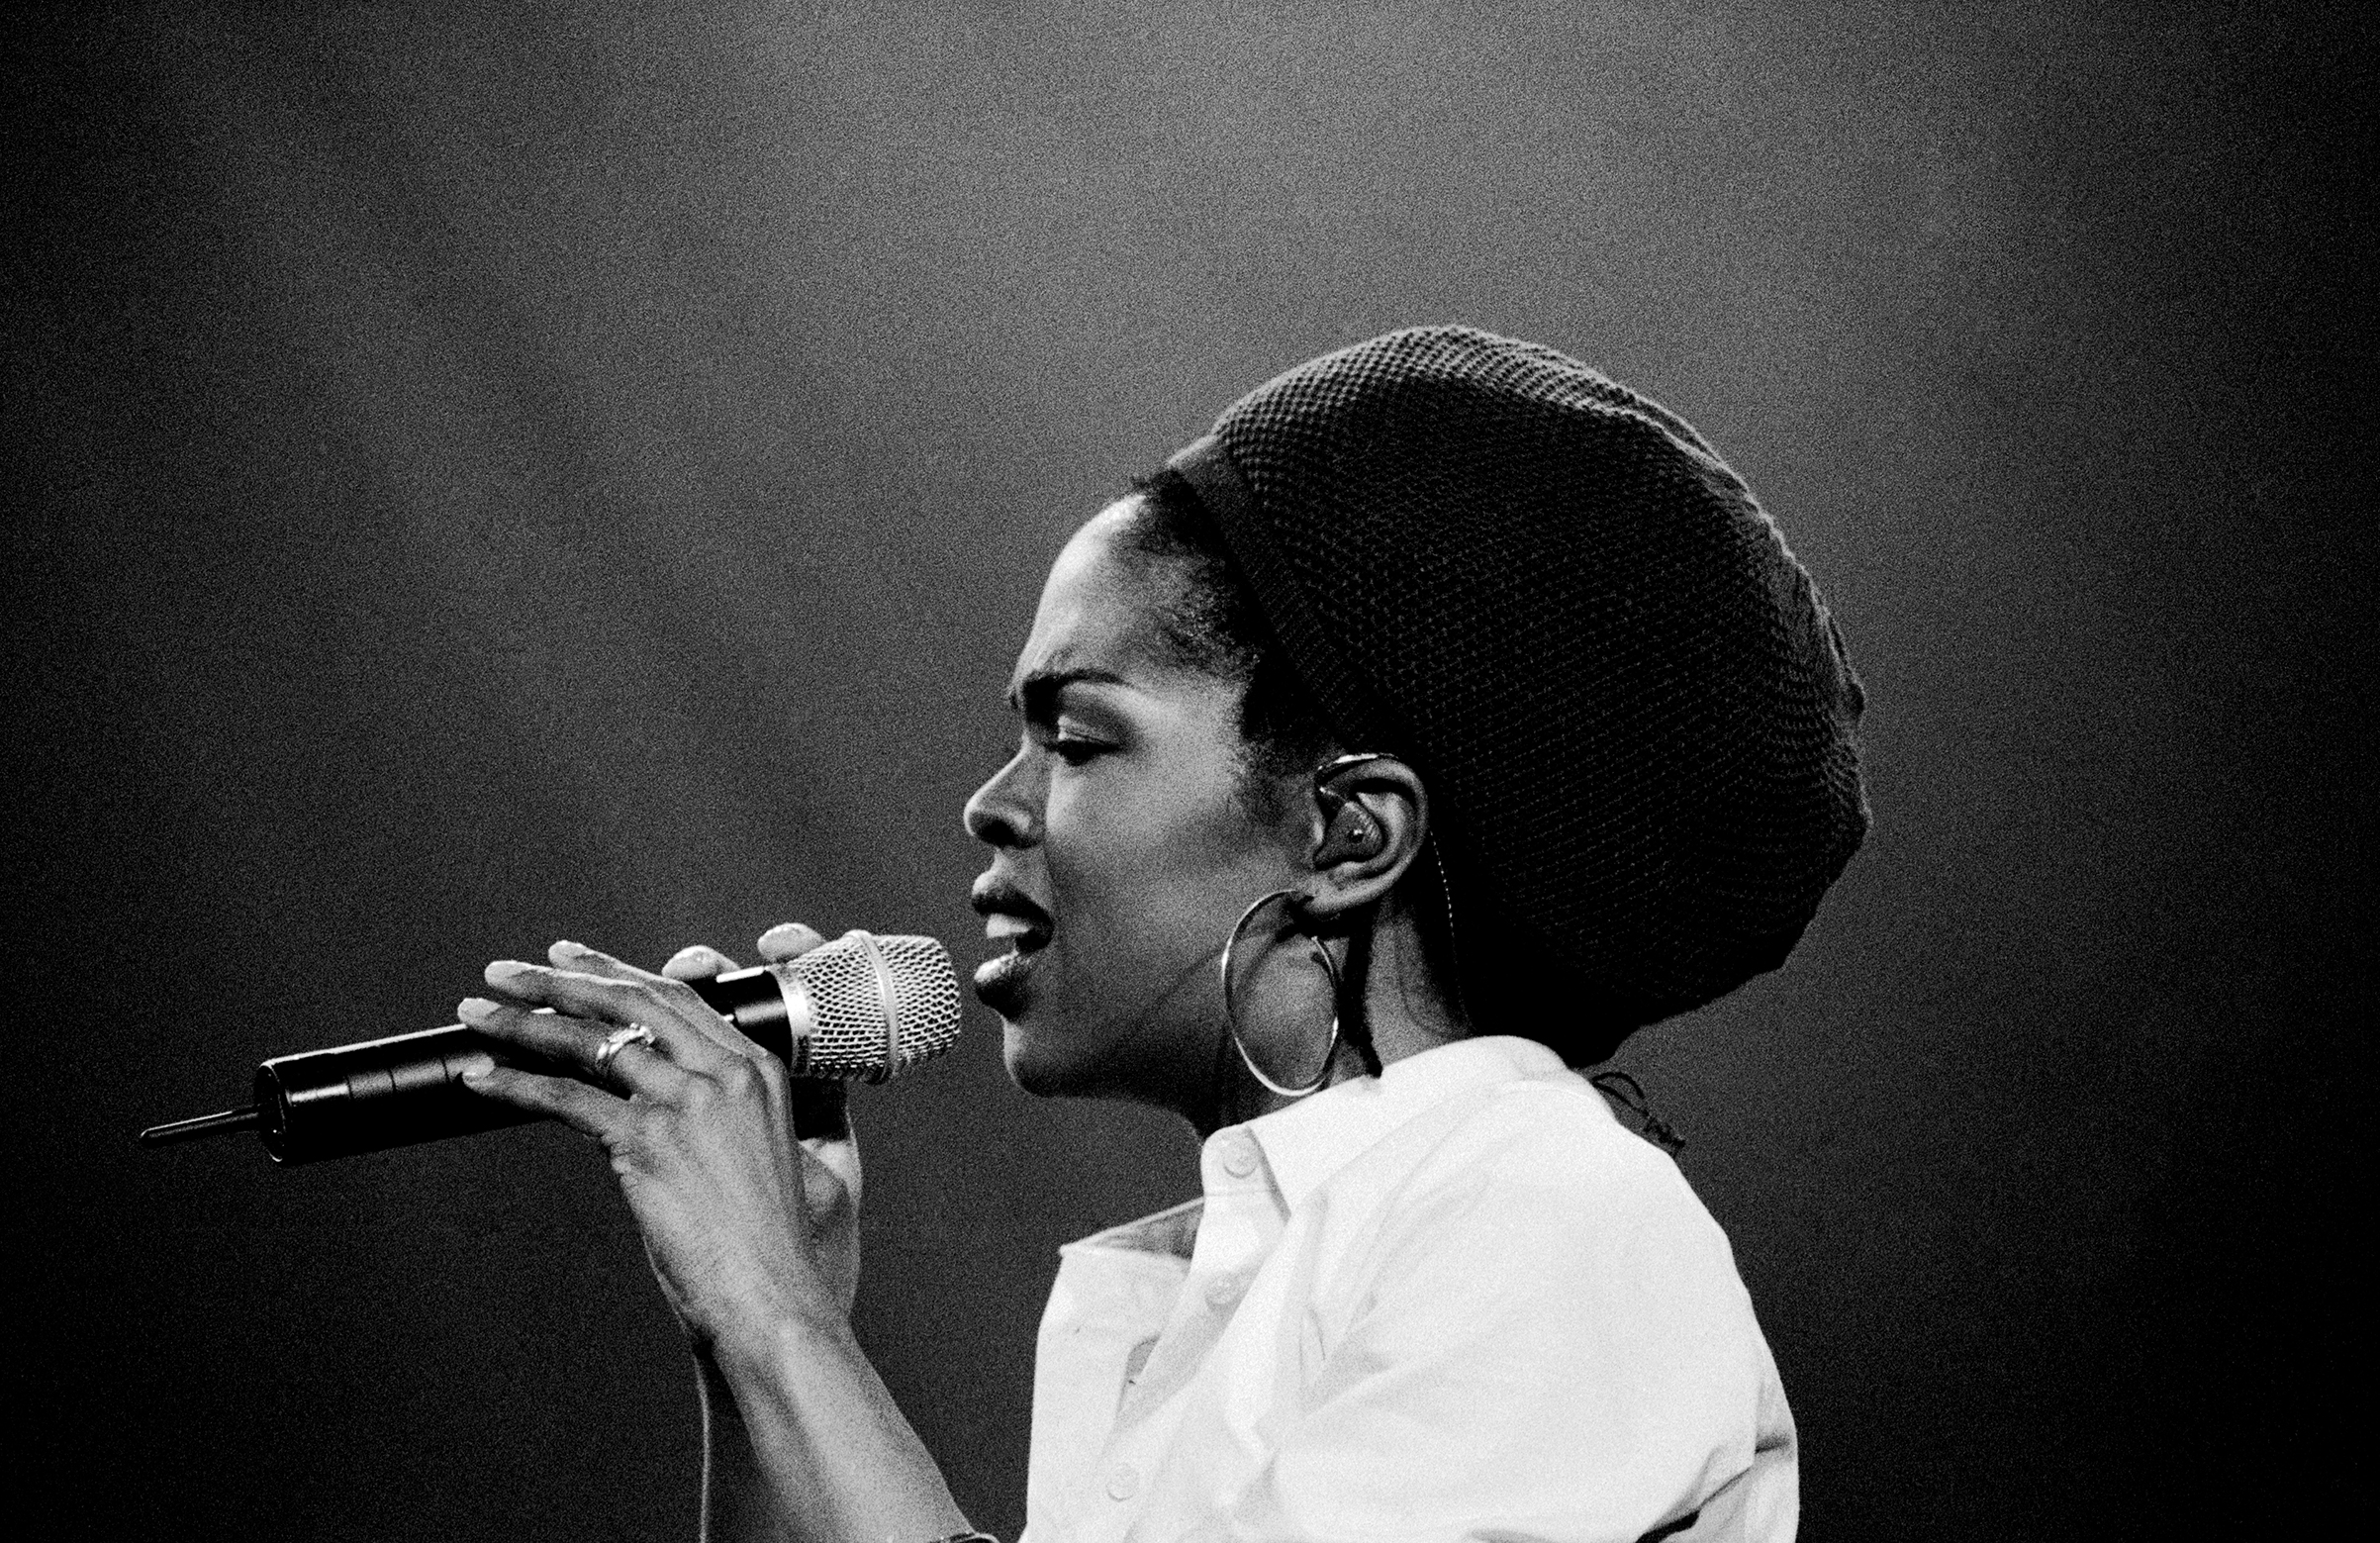 Lauryn Hill performing at Brixton Academy during the Miseducation of Lauryn Hill Tour in London on Feb 5, 1999. (Chris Lopez—Sony Music Archive/Getty Images)